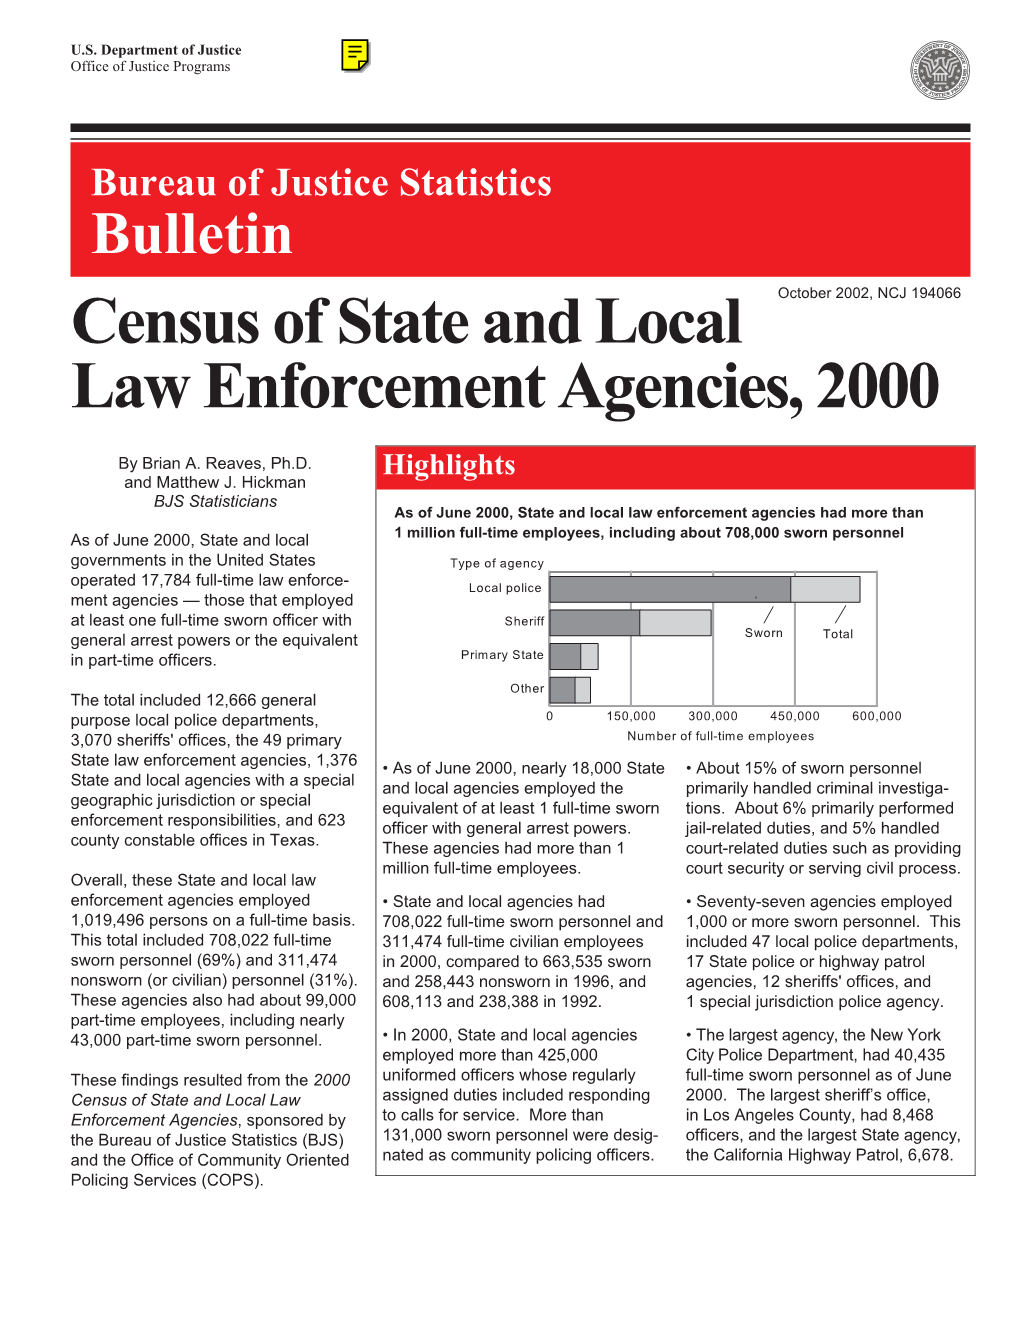 Census of State and Local Law Enforcement Agencies, 2000